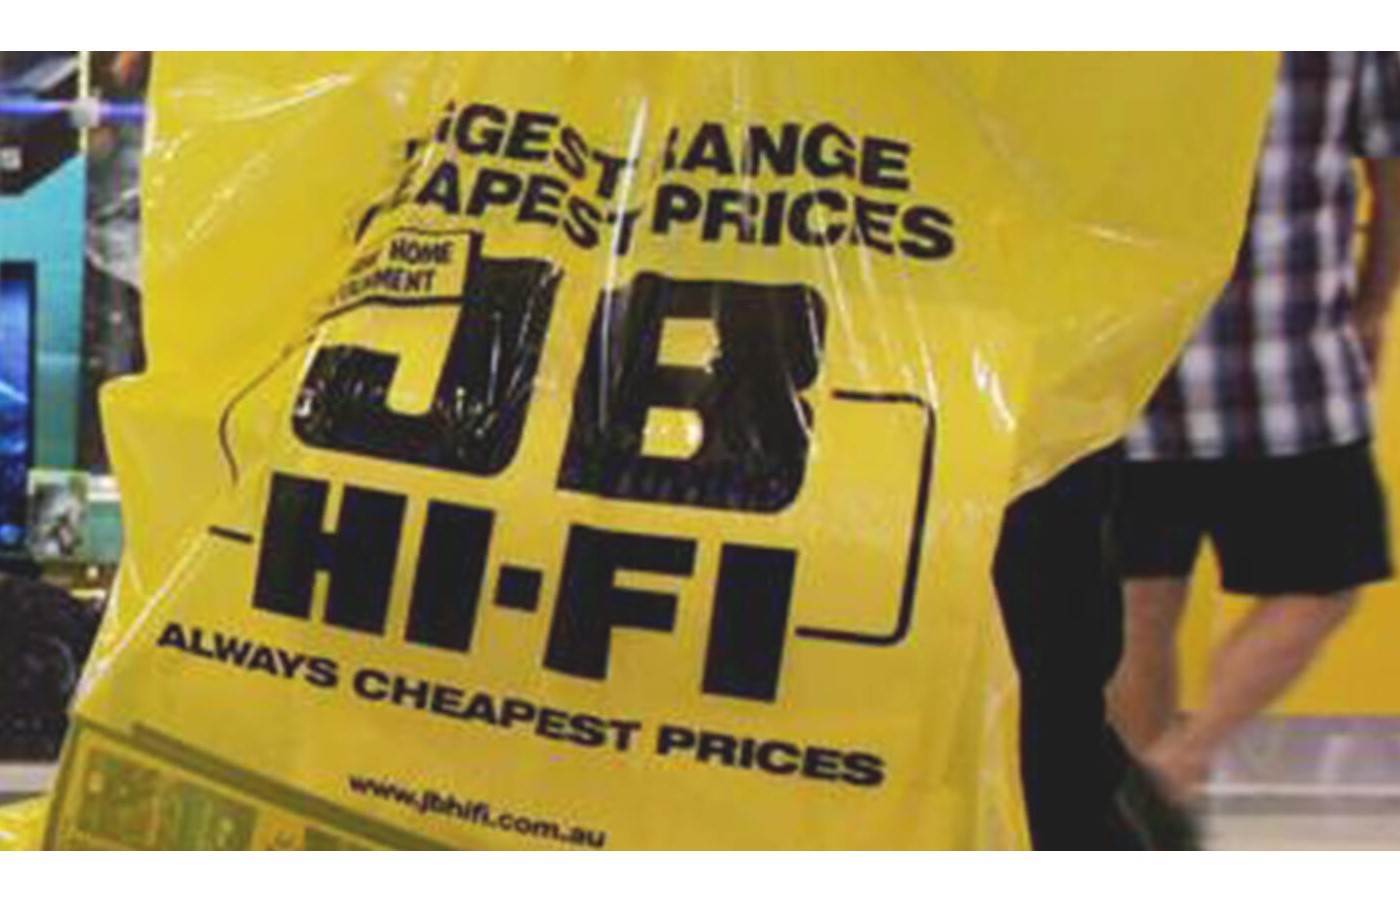 JB Hi-Fi changes tune: results mention 'Commercial' business, not